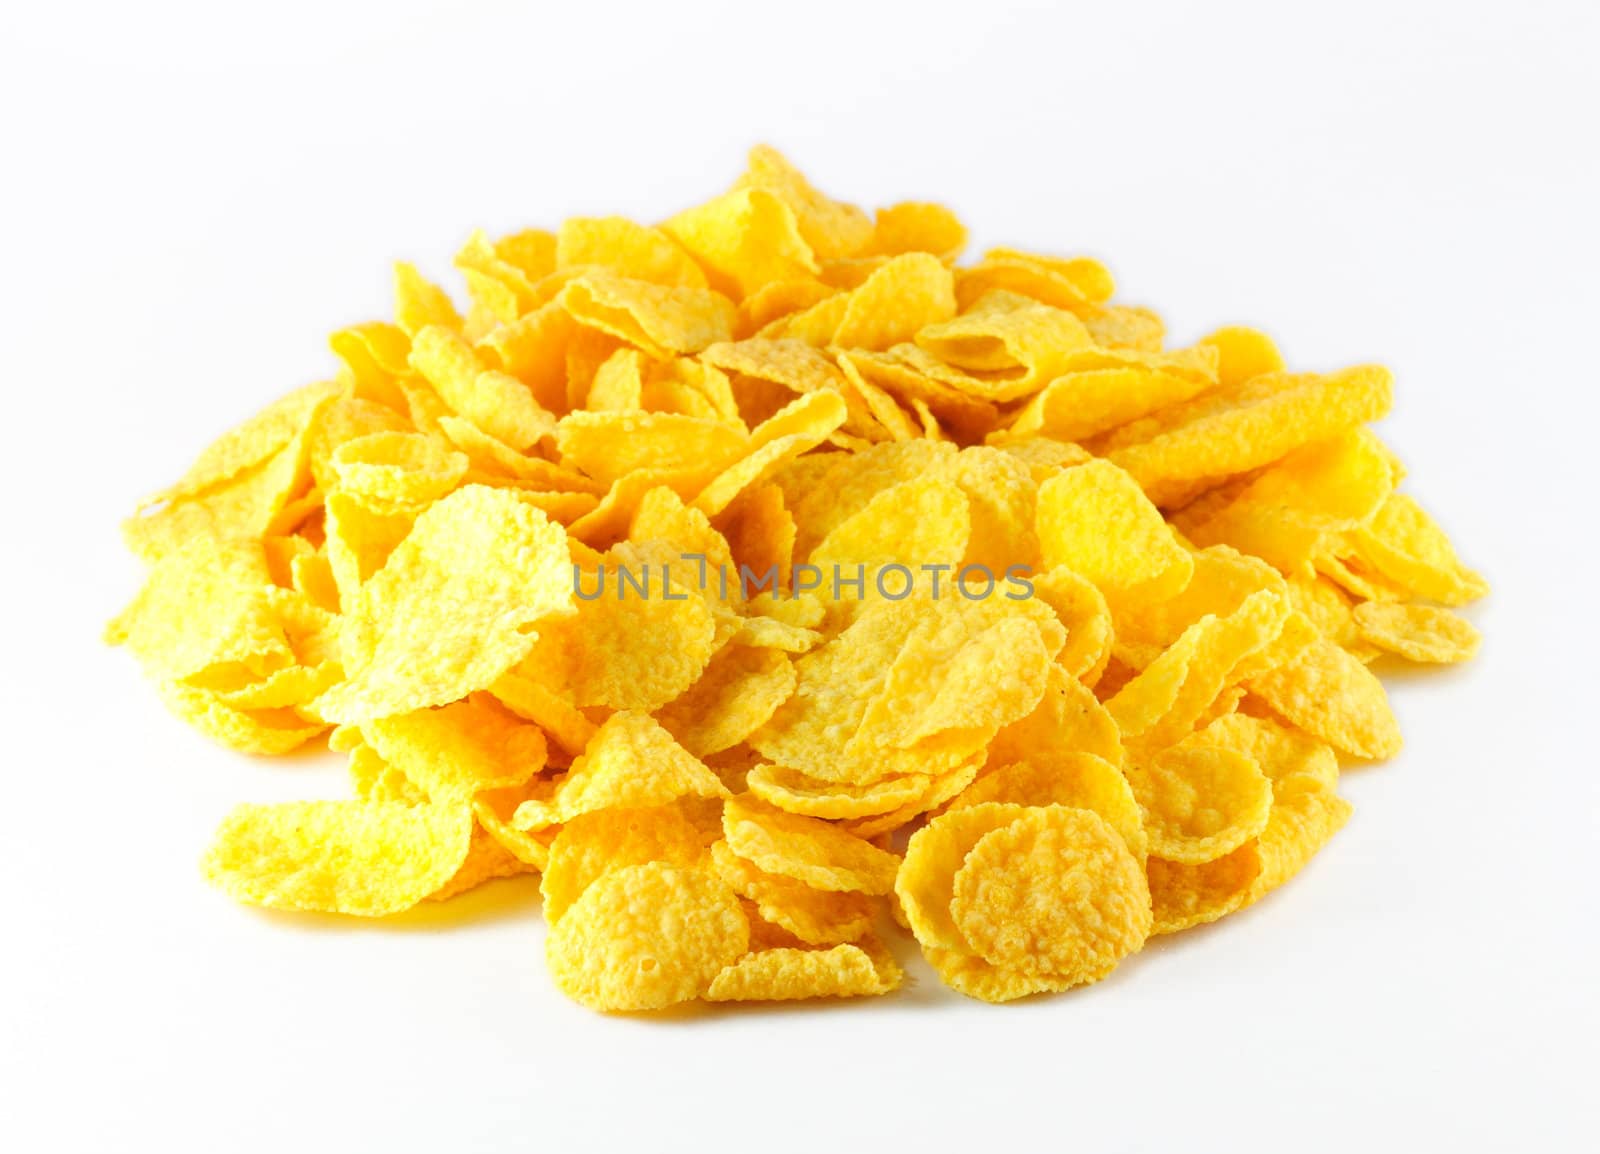 pile of cornflakes isolated